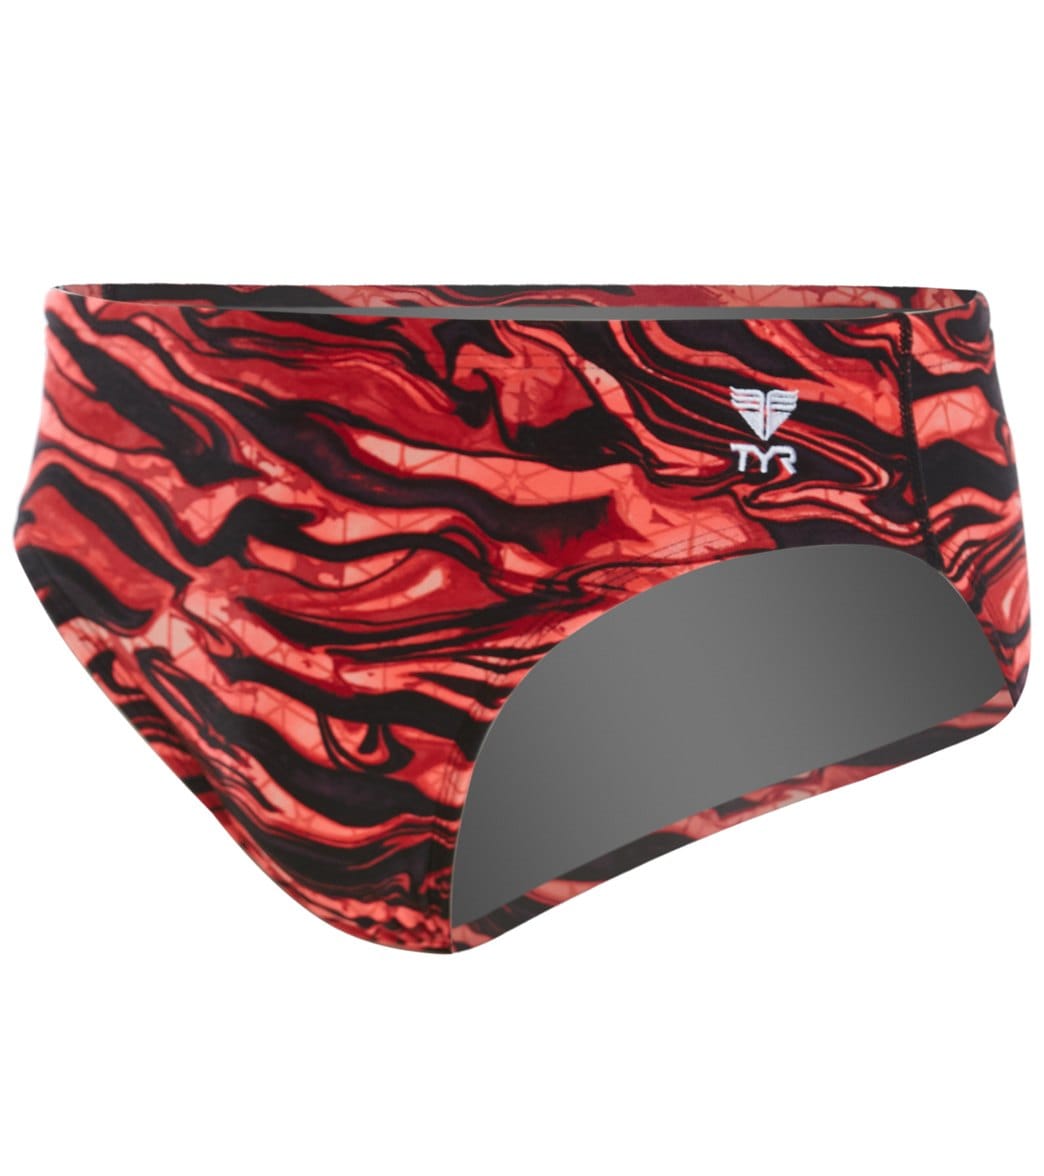 TYR Men's Miramar Allover Racer Brief Swimsuit - Red 34 Polyester - Swimoutlet.com